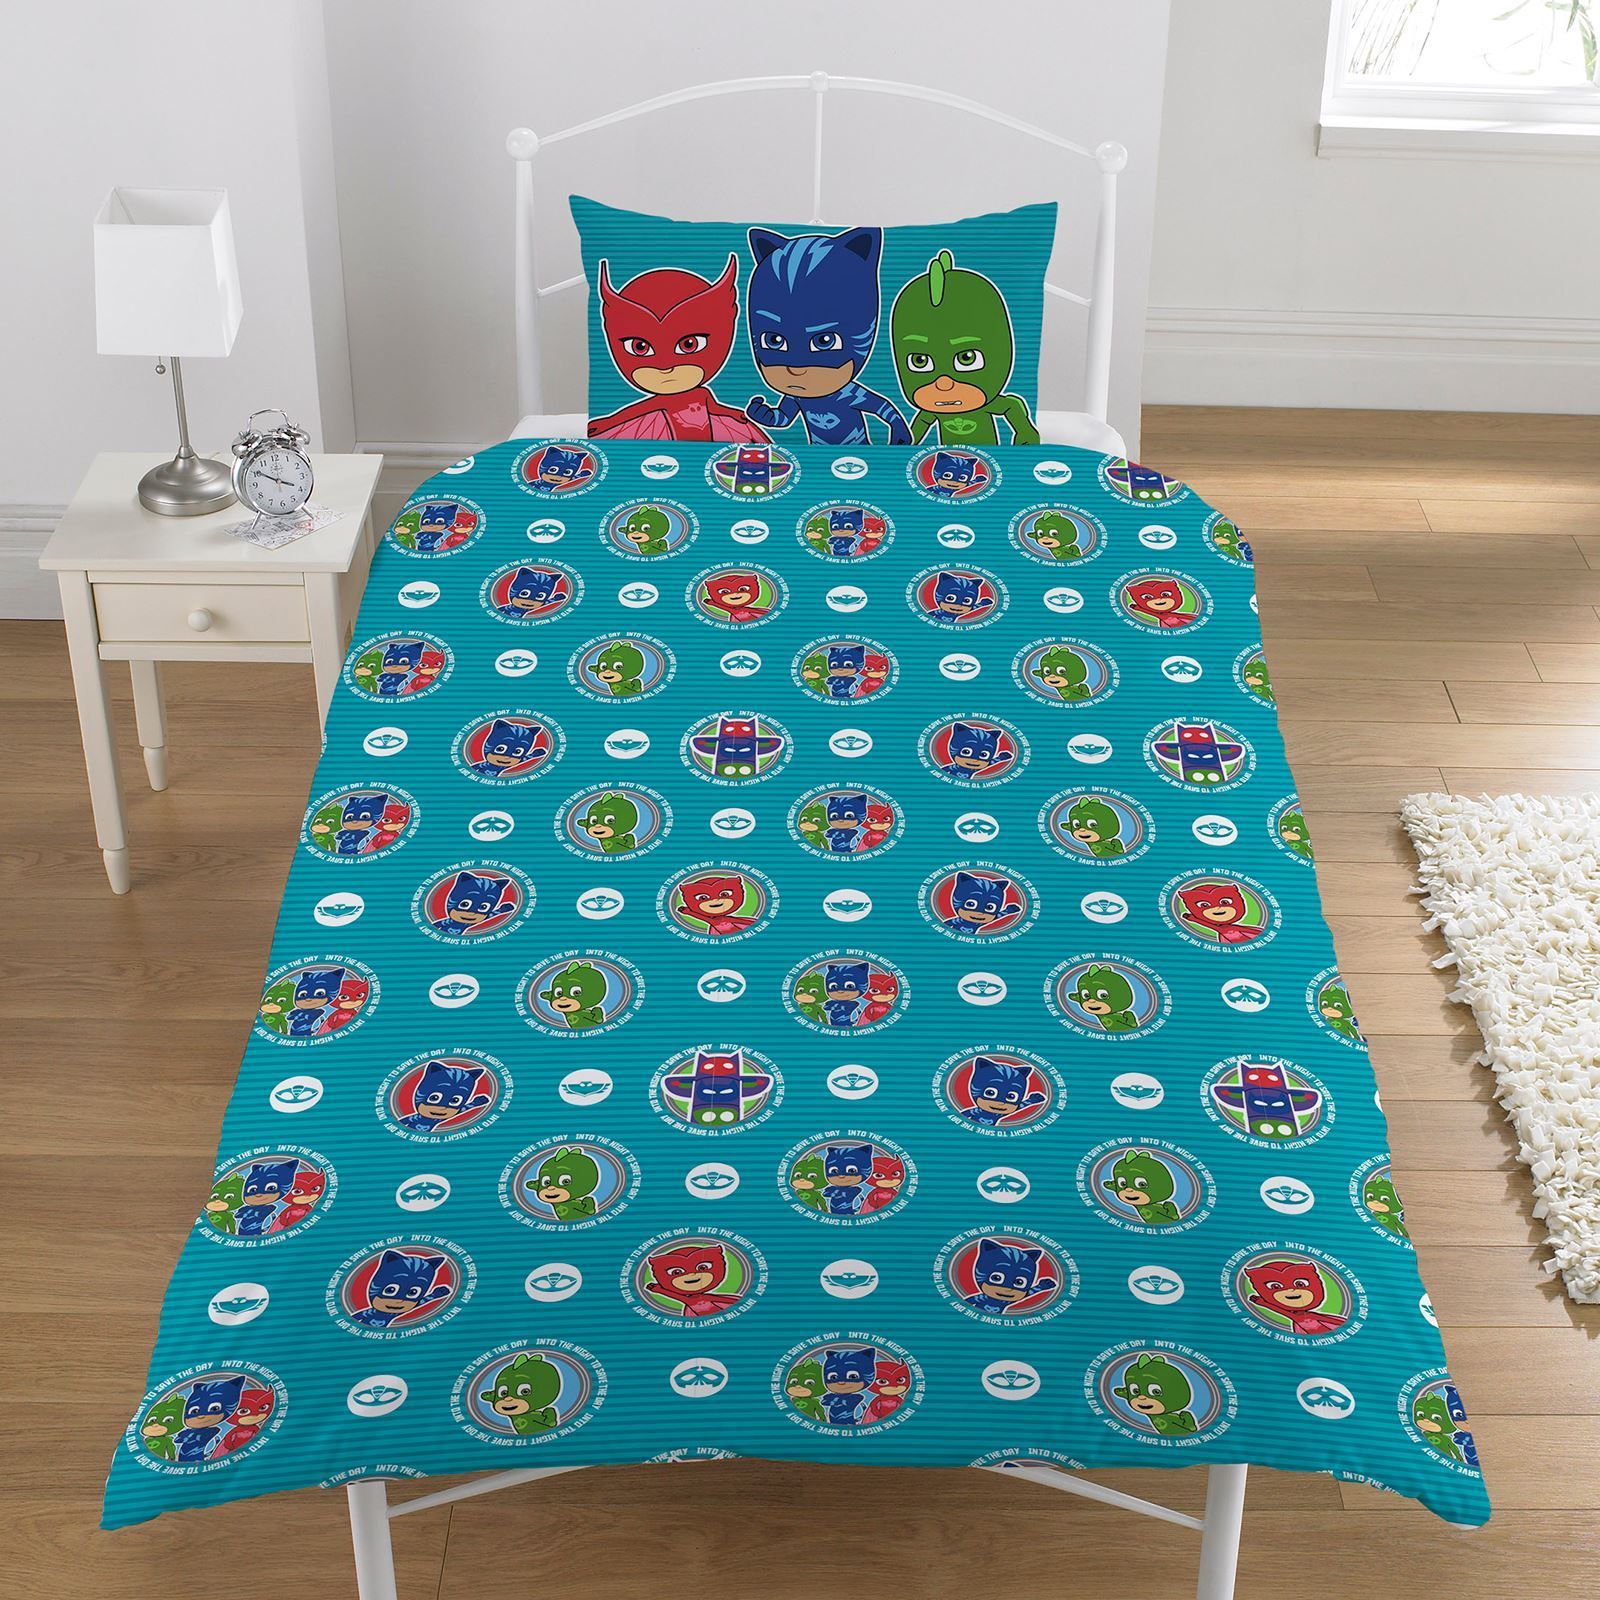 Disney Pj Masks 'It' S Time To Be a Hero' Reversible Rotary Single Bed Duvet Quilt Cover Set